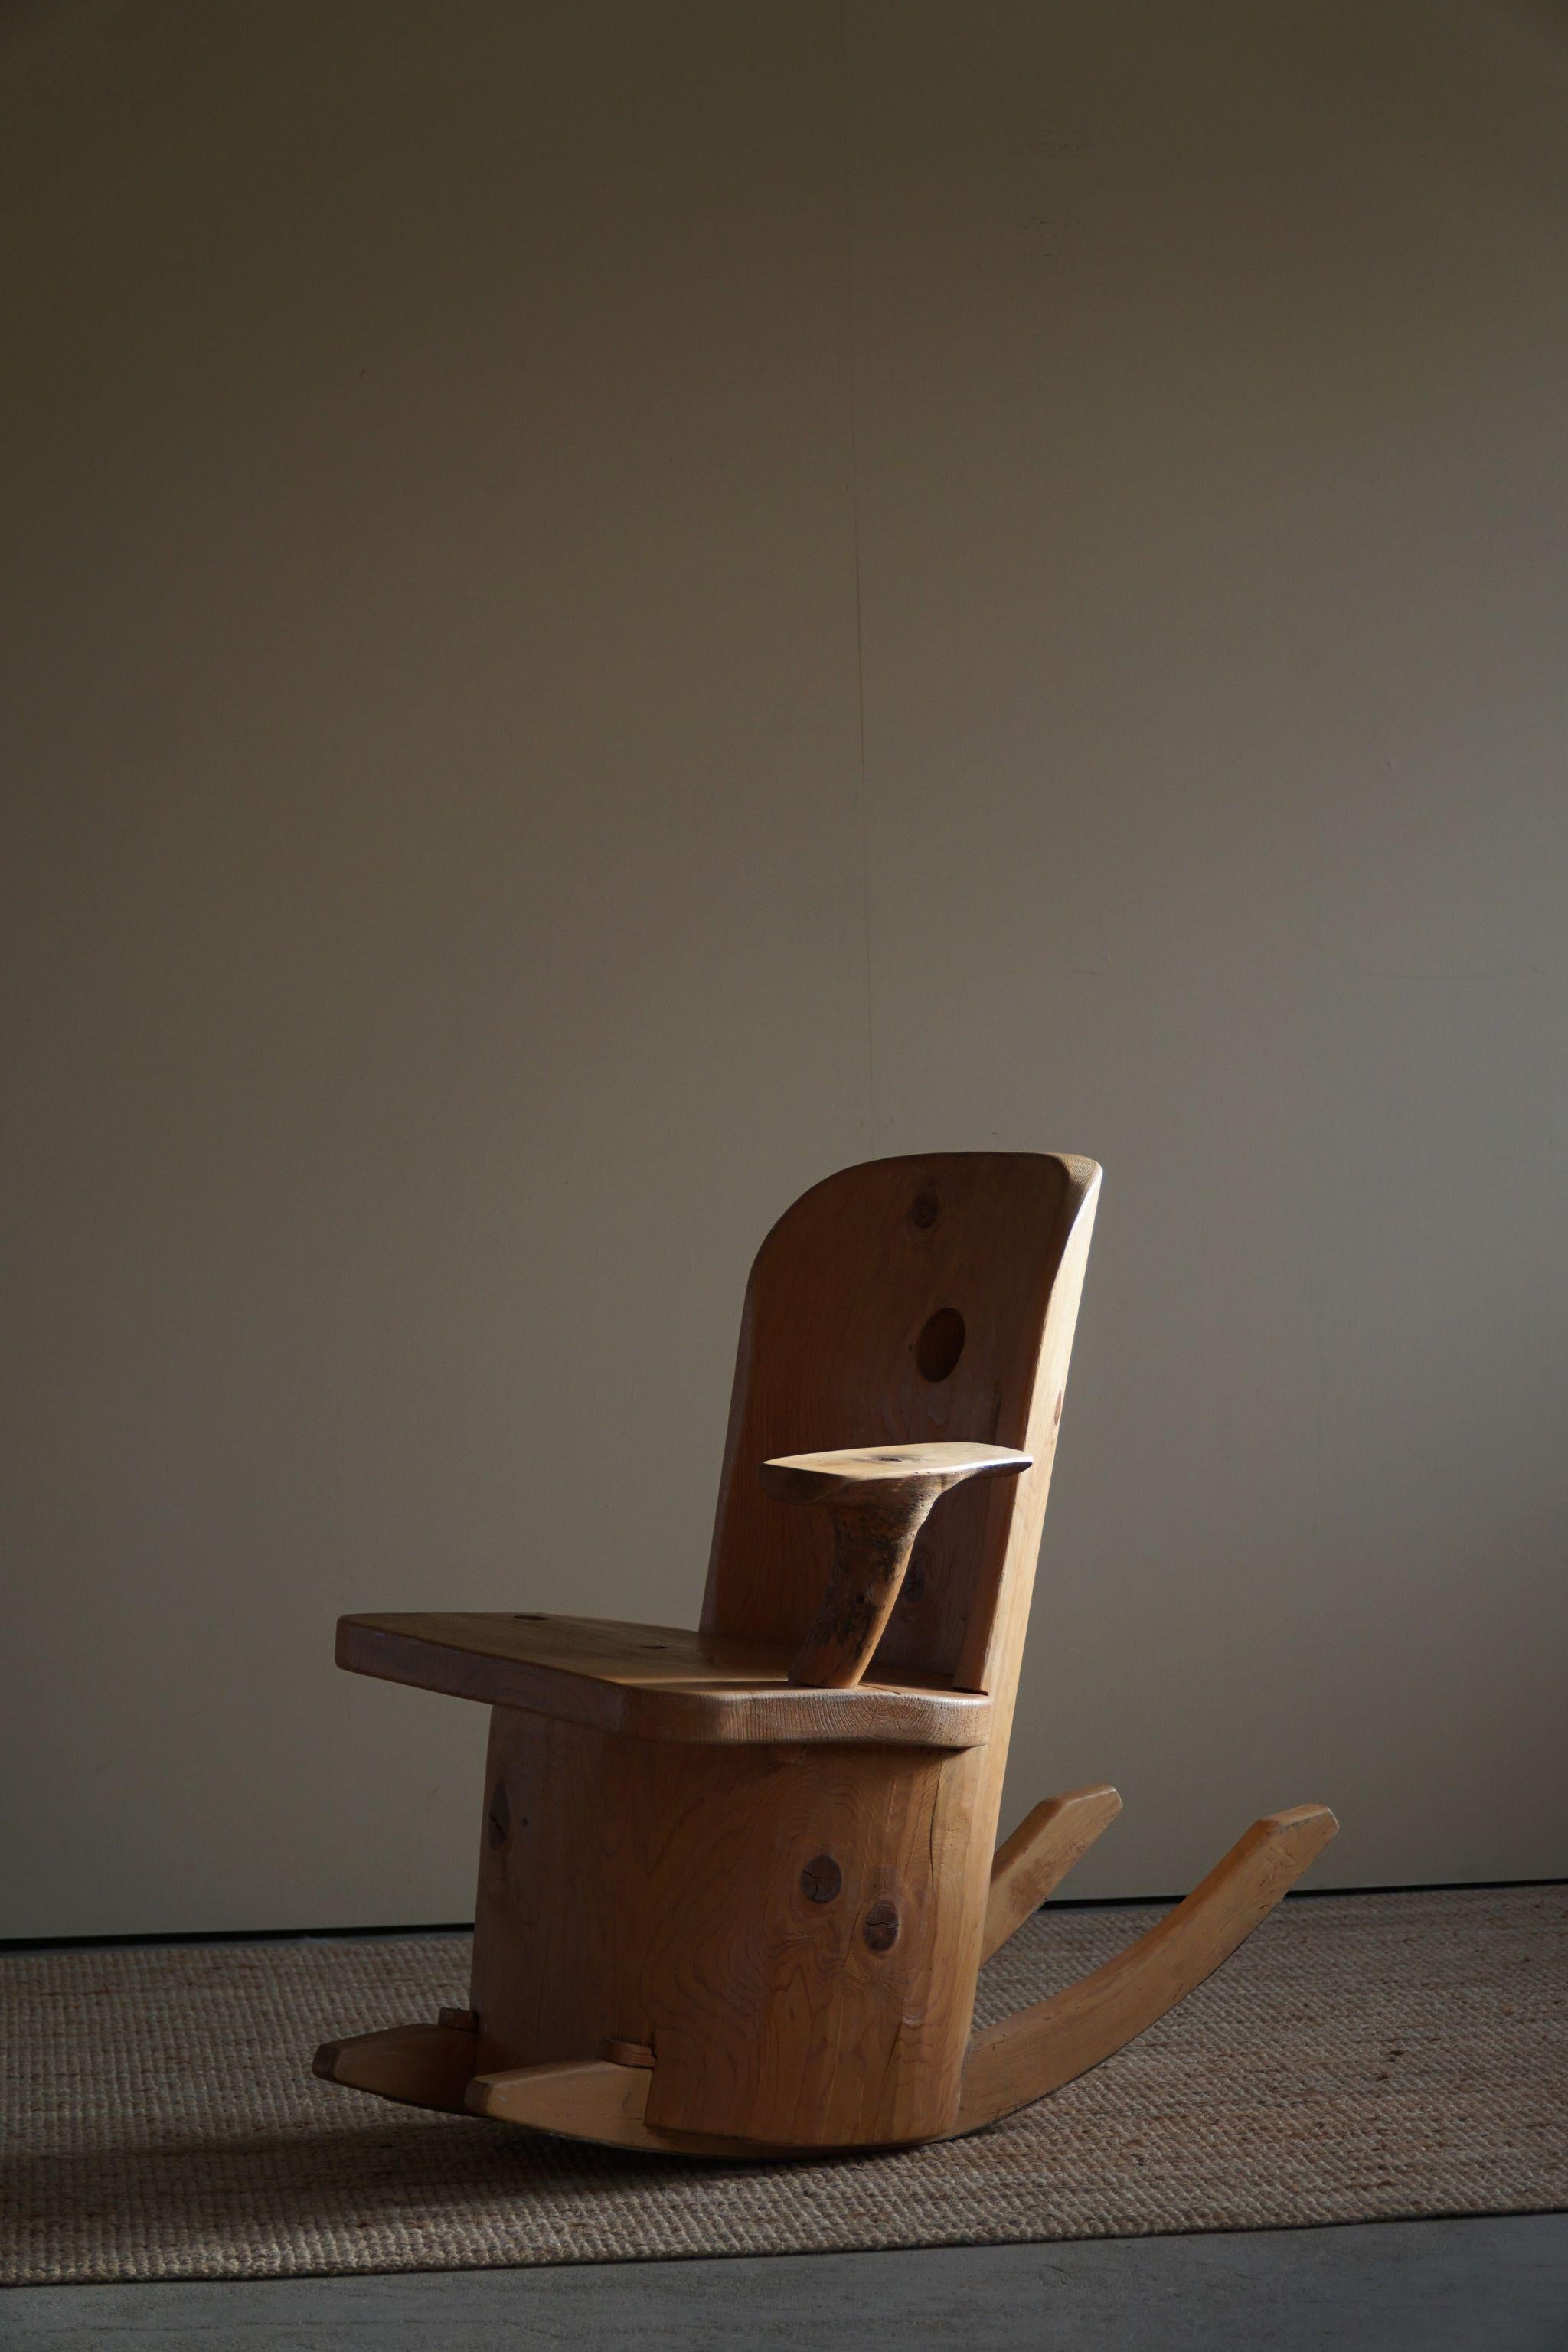 Hand-Carved Sculptural Unique Rocking Chair by Finnish Matti Martikka in Solid Pine, 1960s For Sale